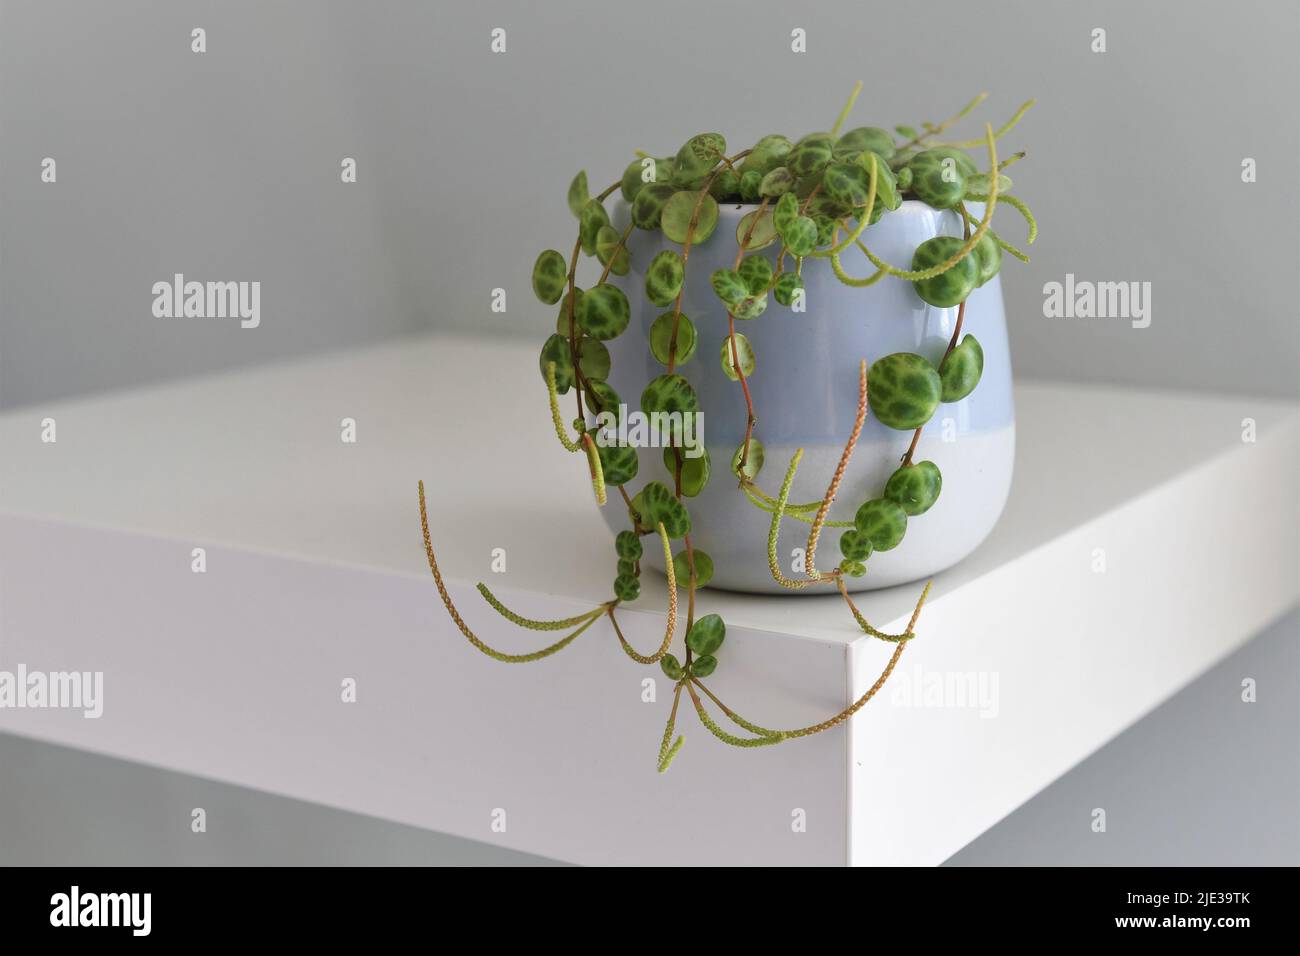 String of turtles (Peperomia prostrata) house plant in a blue pot, isolated on a white shelf and gray green background. Landscape orientation. Stock Photo